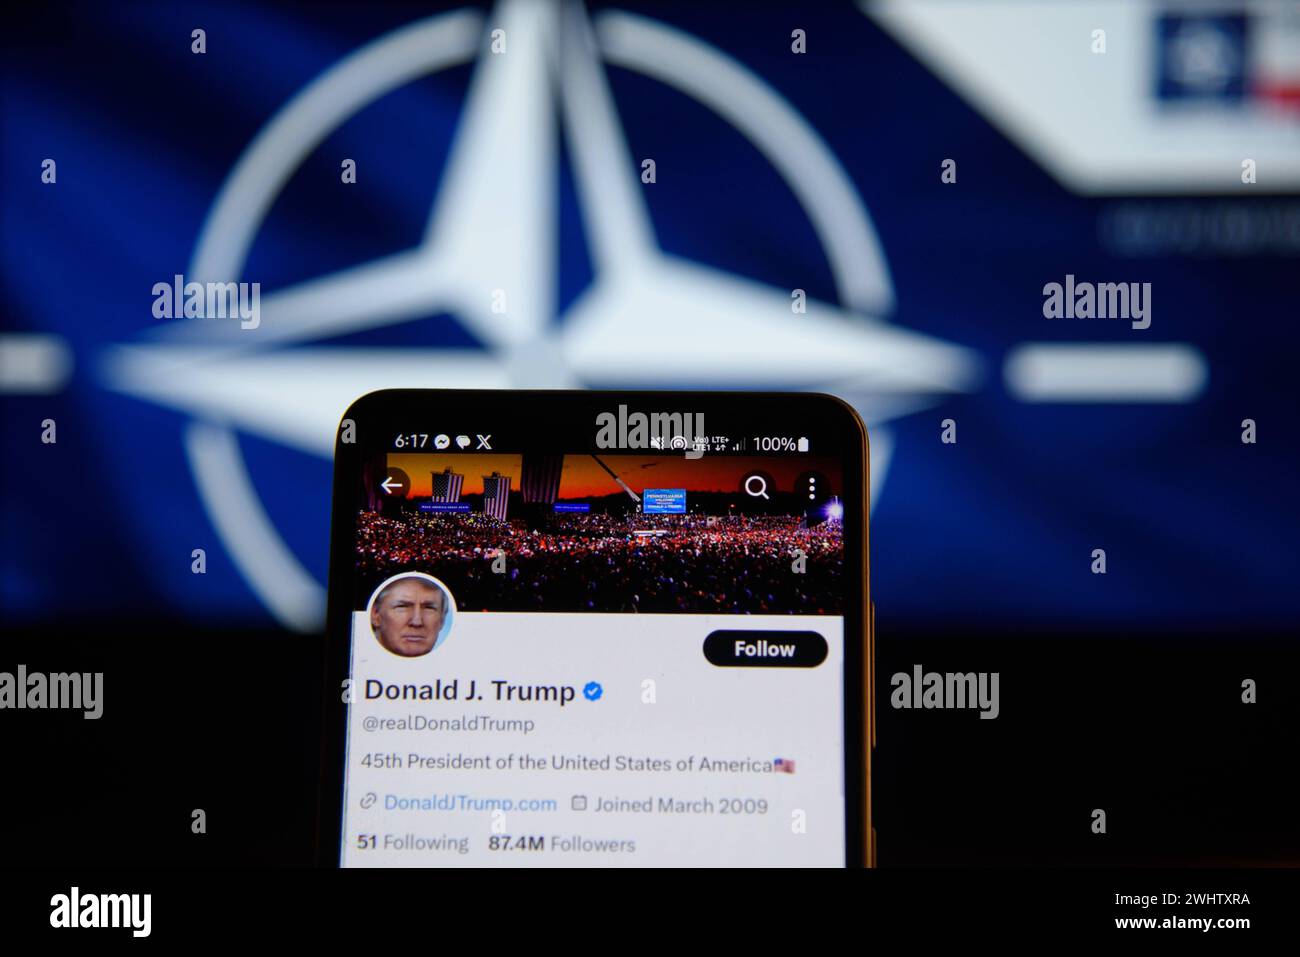 U.S.A and NATO Illustrations. Former president of the United States of America Donald Trump account on the social media platform X is pictured on a smartphone screen before a NATO logo on February 11, 2024 in Warsaw, Poland. Warsaw Poland Copyright: xAleksanderxKalkax Stock Photo